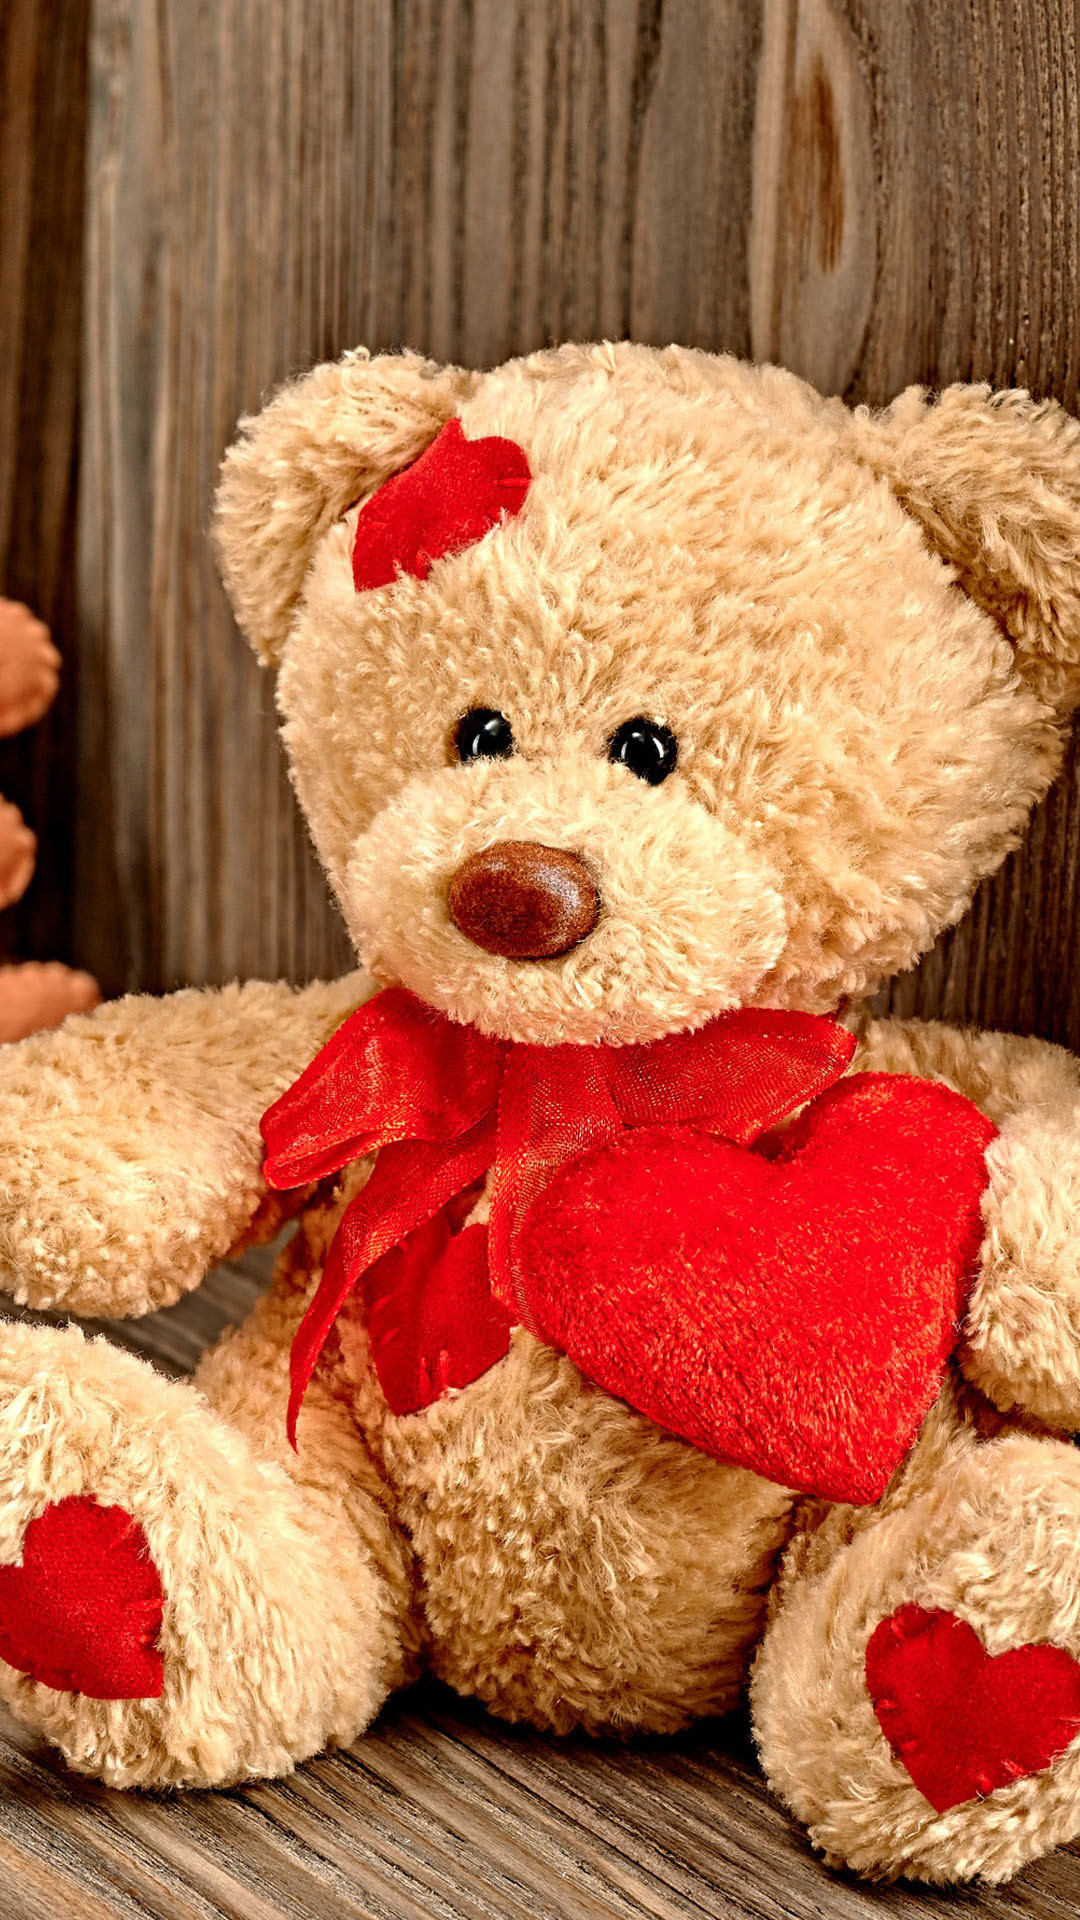 Teddy Bear Love Iphone 6 And 6 Plus Hd Wallpapers - Love Wallpapers Teddy Bear - HD Wallpaper 